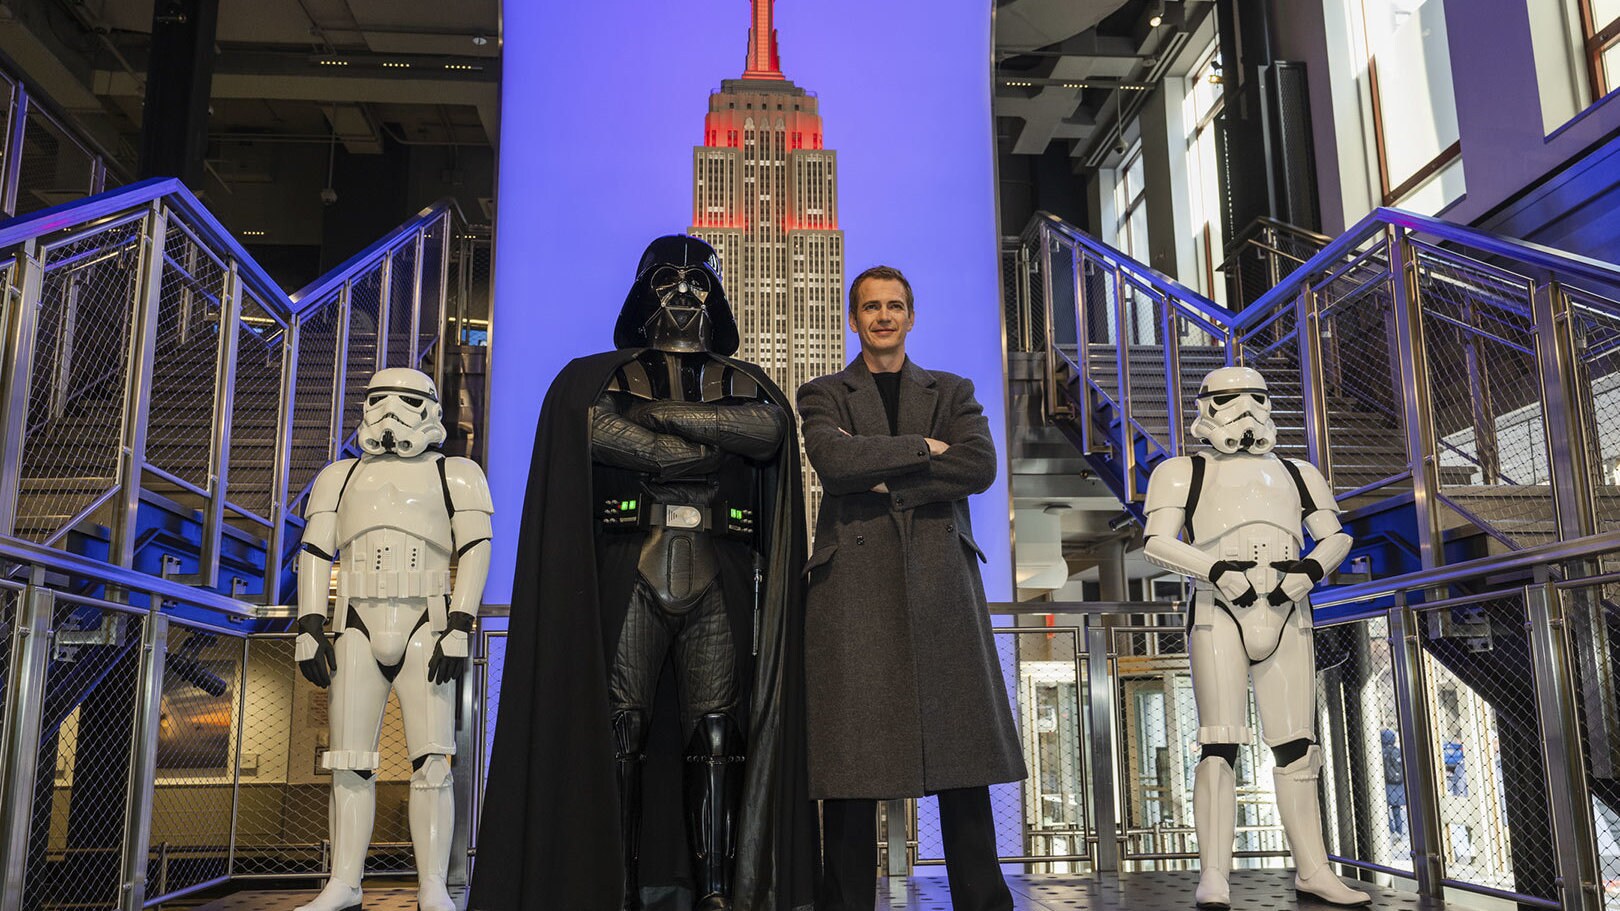 Darth Vader and Hayden Christensen pose together at The Empire State Building.